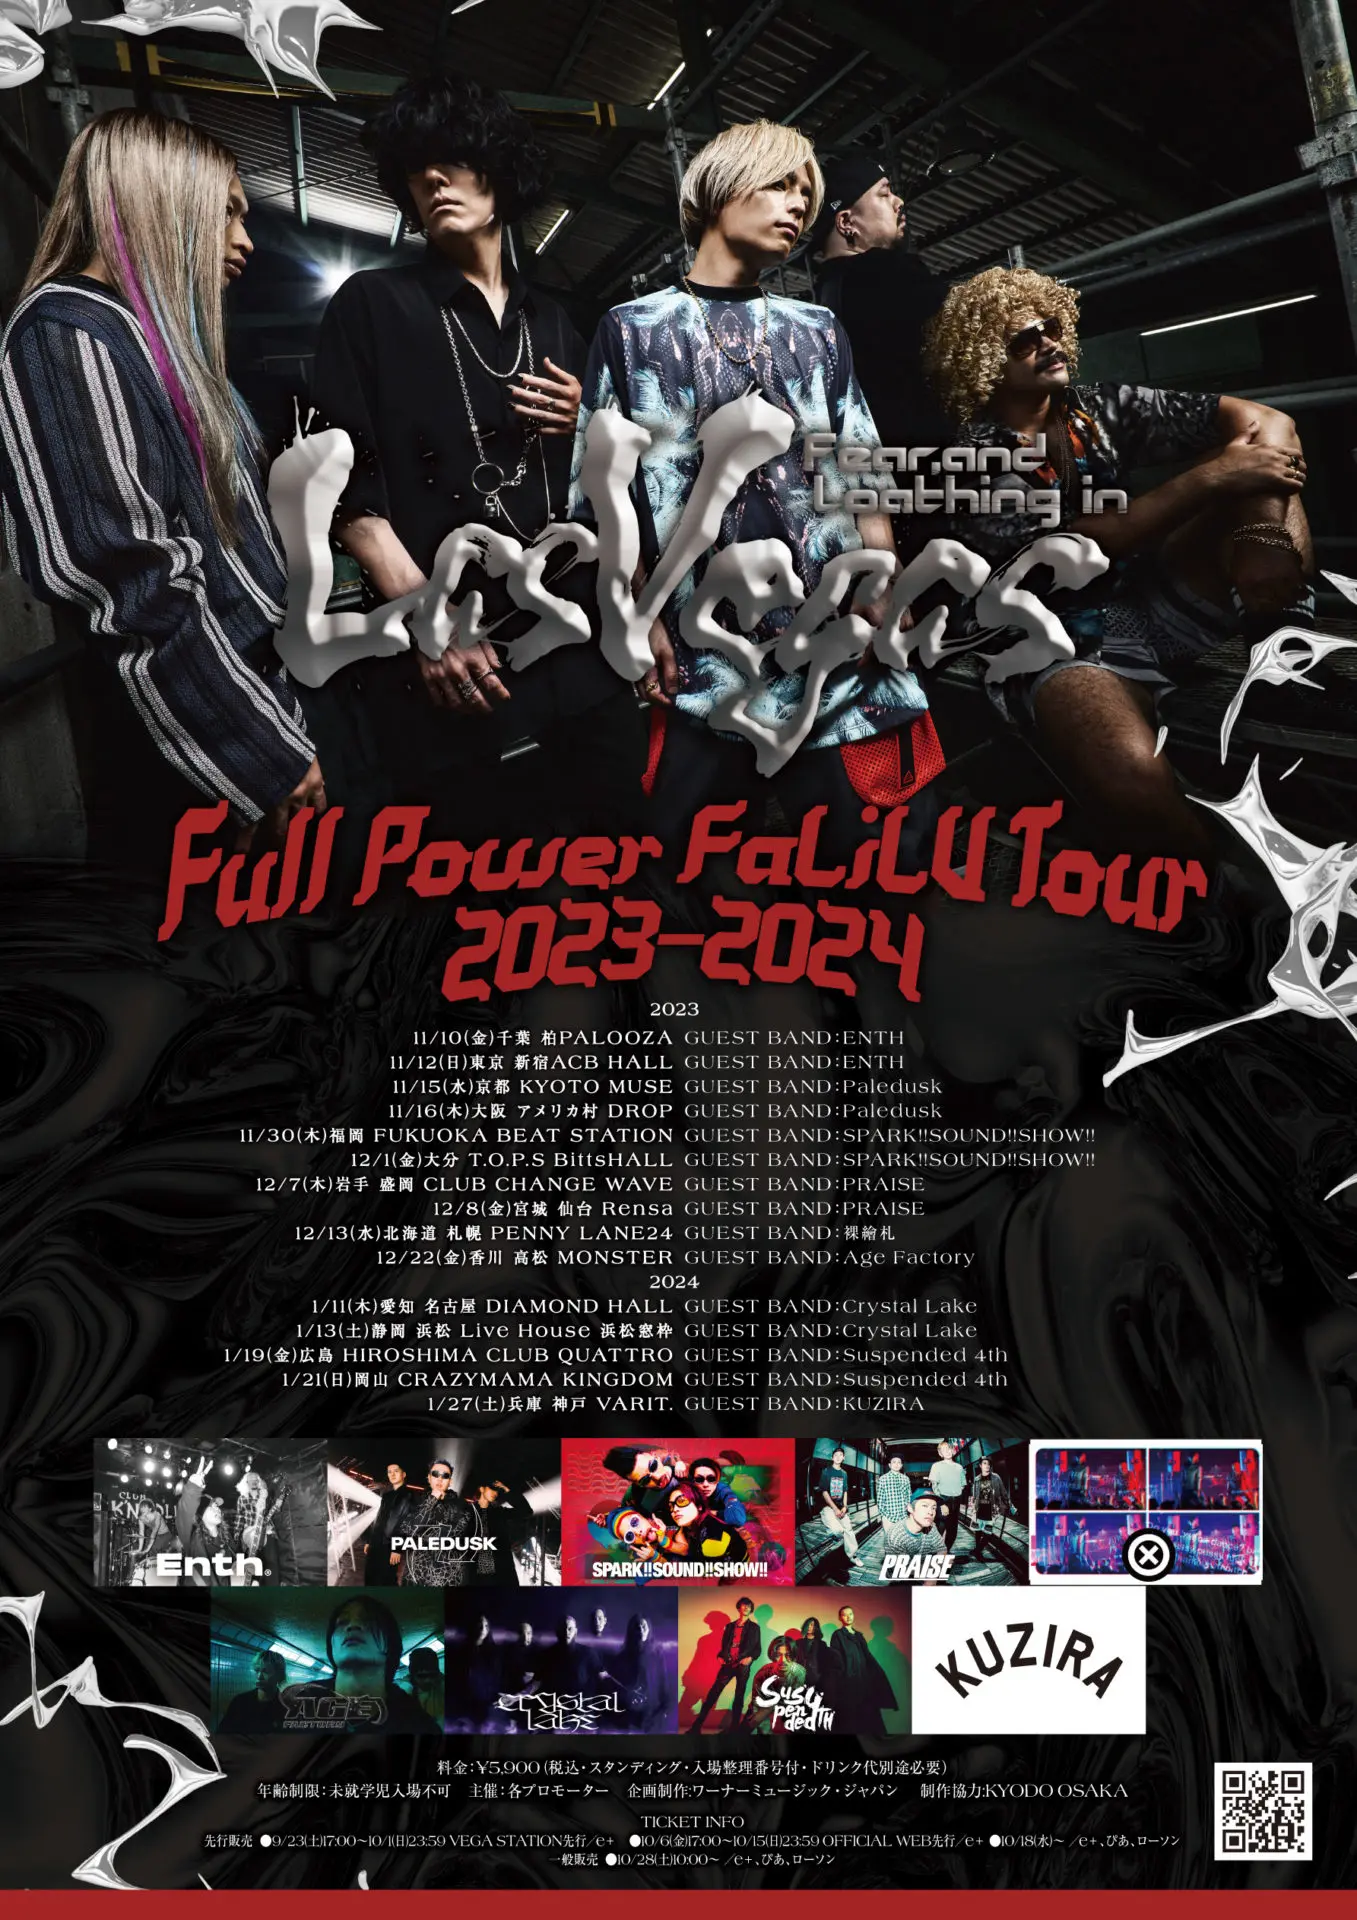 Full Power FaLiLV Tour 2023-2024」開催決定！！ | Fear, and 